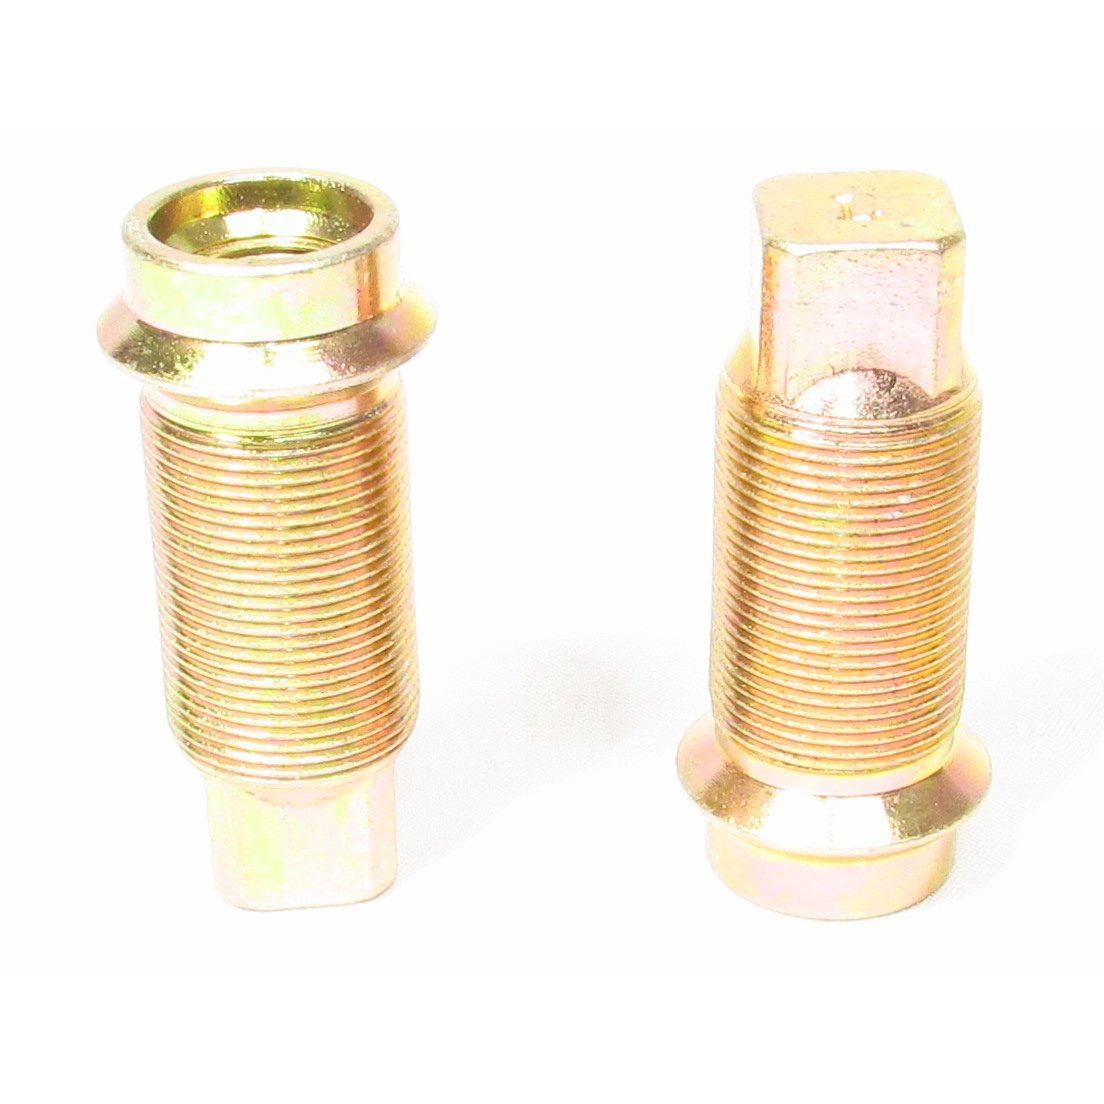 Inner Cap Nut LH 1-1/8"-16 Outer Thread, 3-3/32" Length - Replaces E5978L - 10 Pack